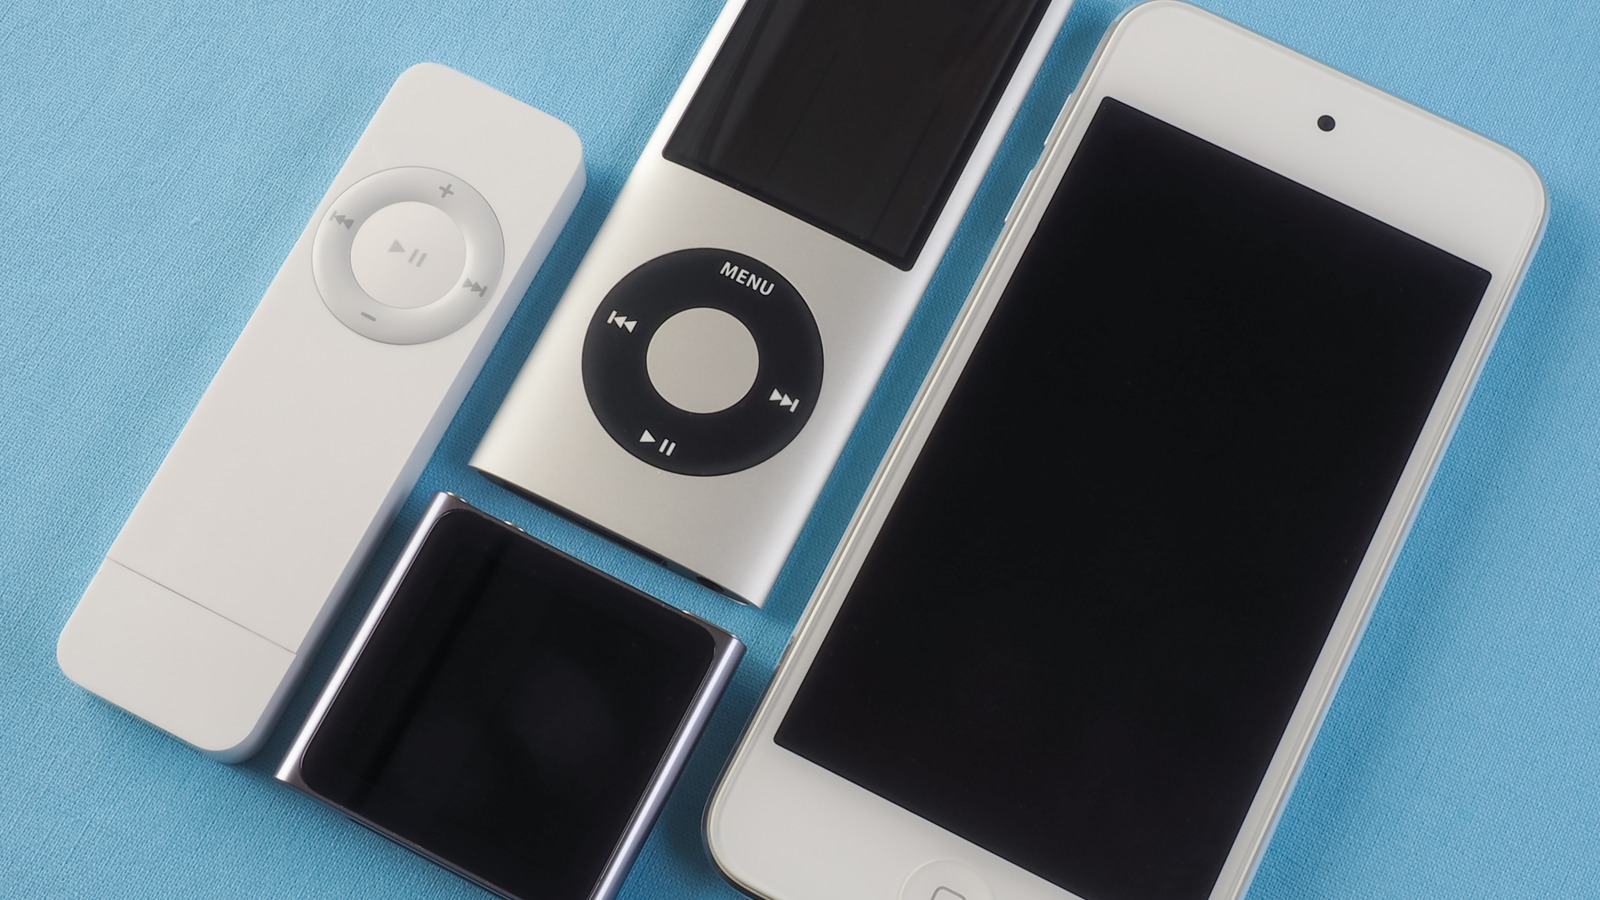 Apple confirms iPod nano and iPod shuffle have been discontinued - The Verge